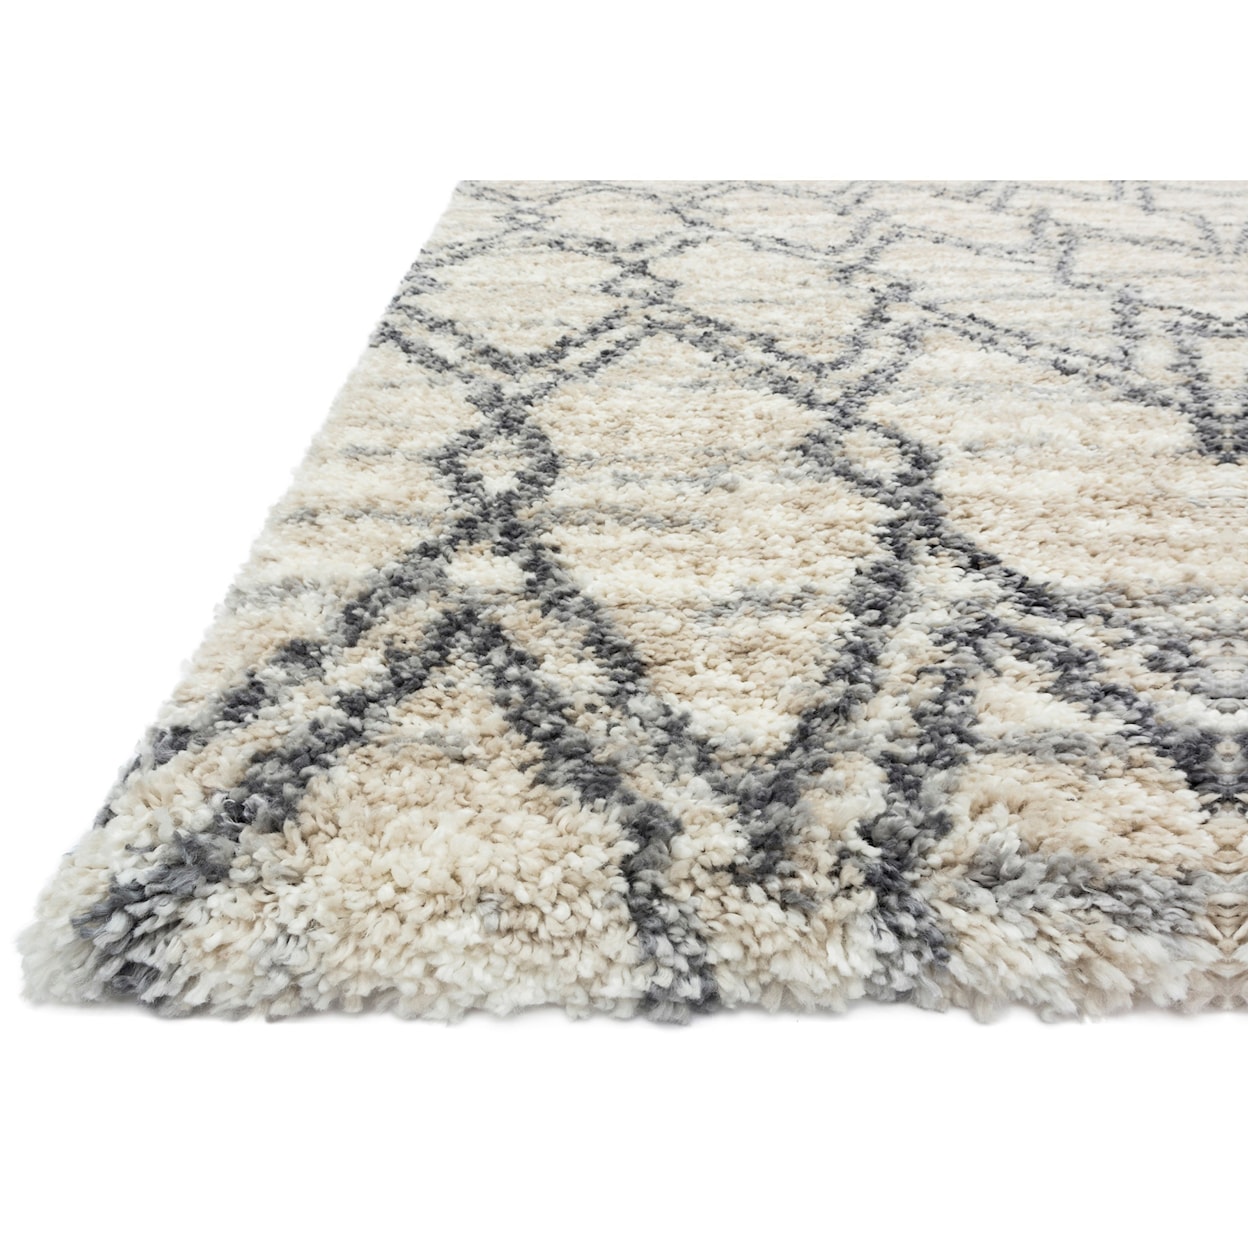 Reeds Rugs Quincy 8'10" x 12' Sand / Graphite Rug